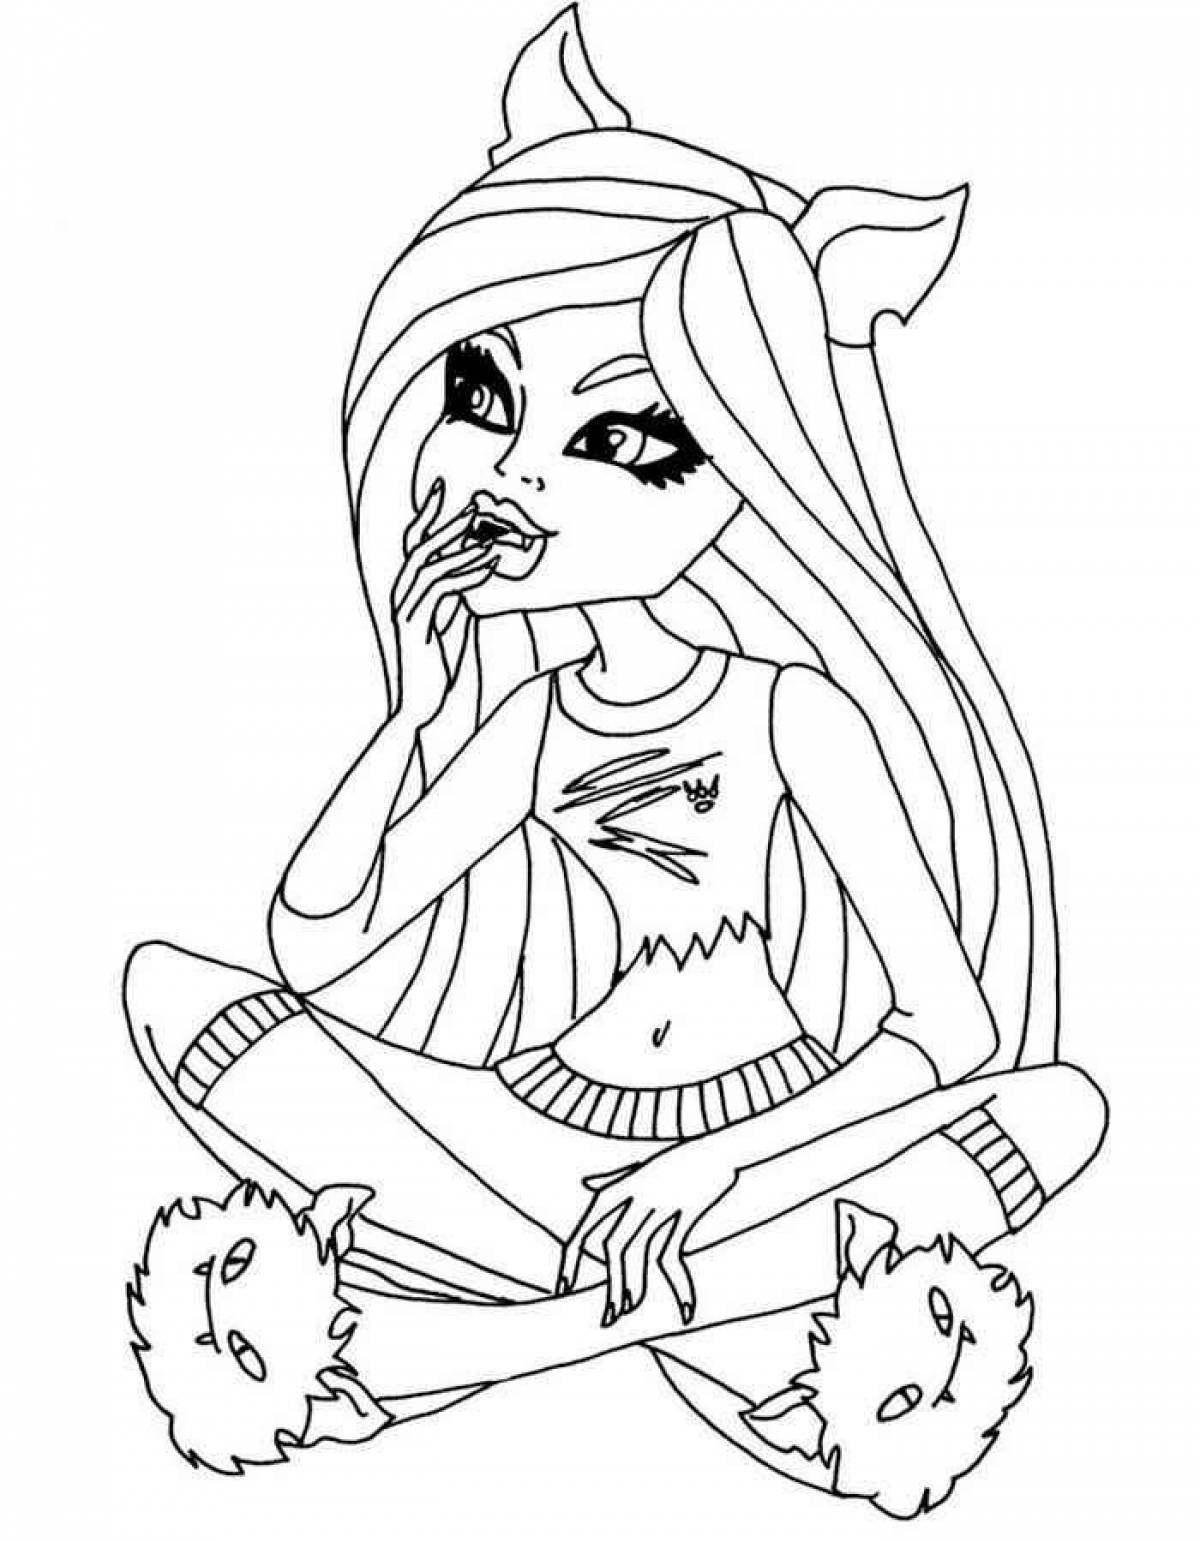 Monster high playful coloring page